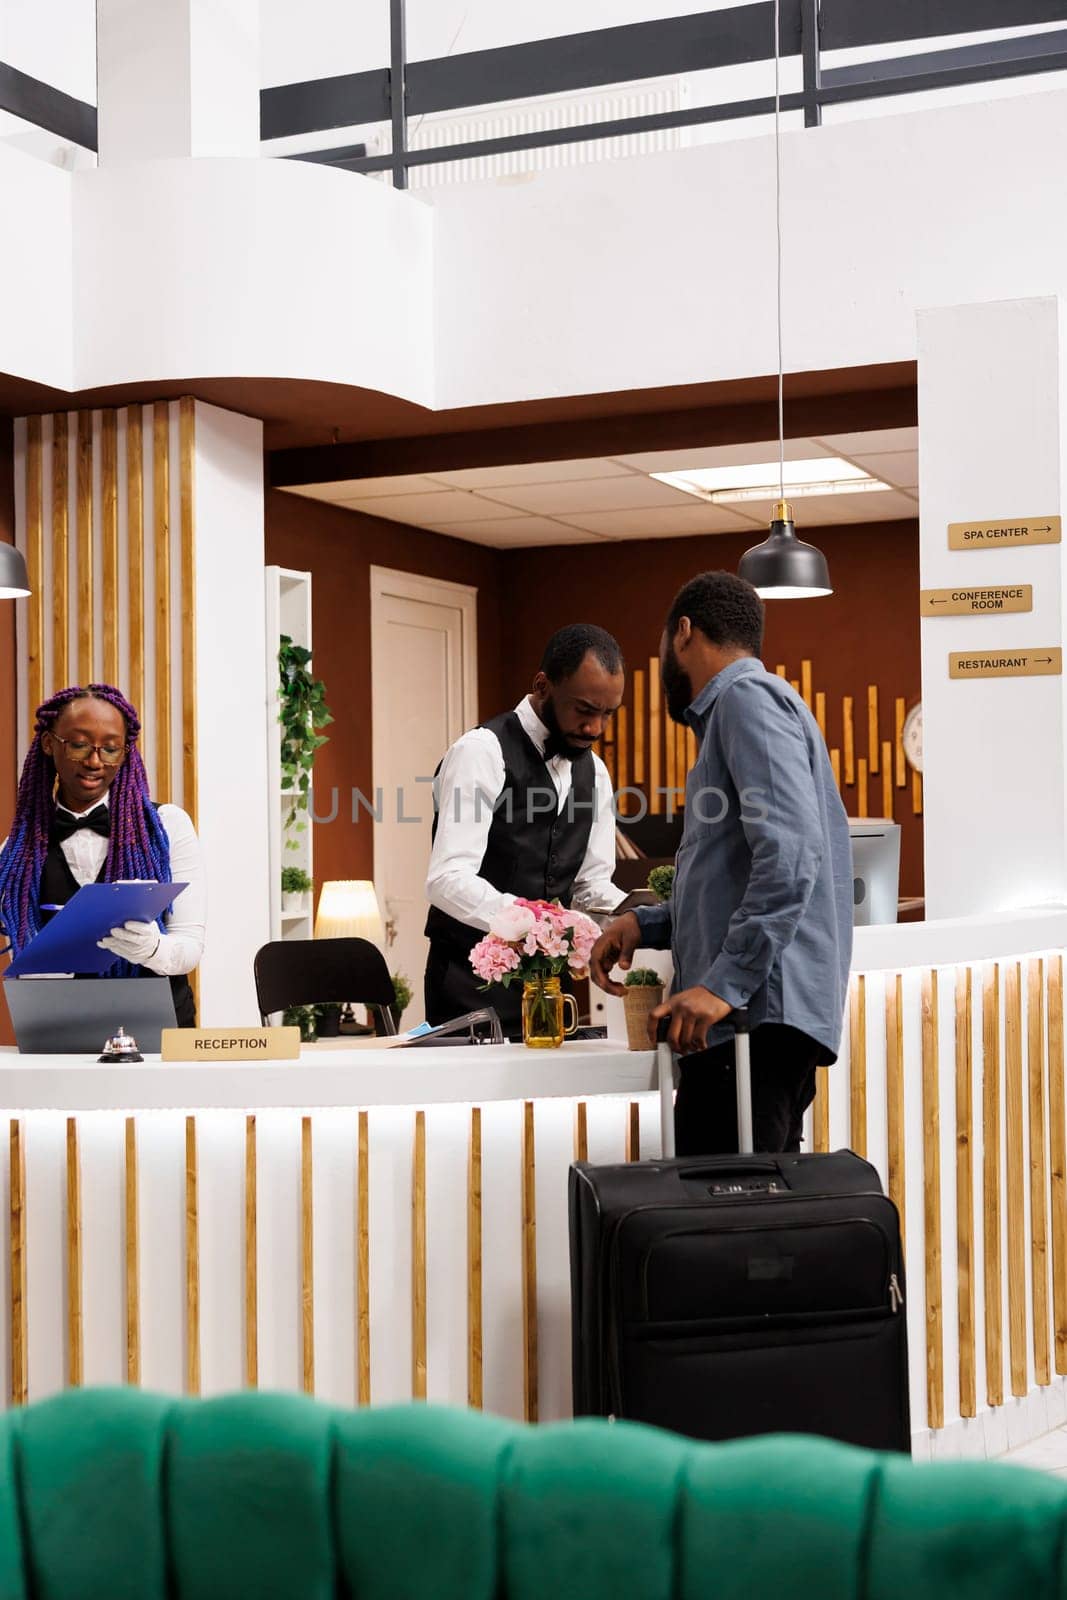 Hotel front desk staff assisting guests by DCStudio